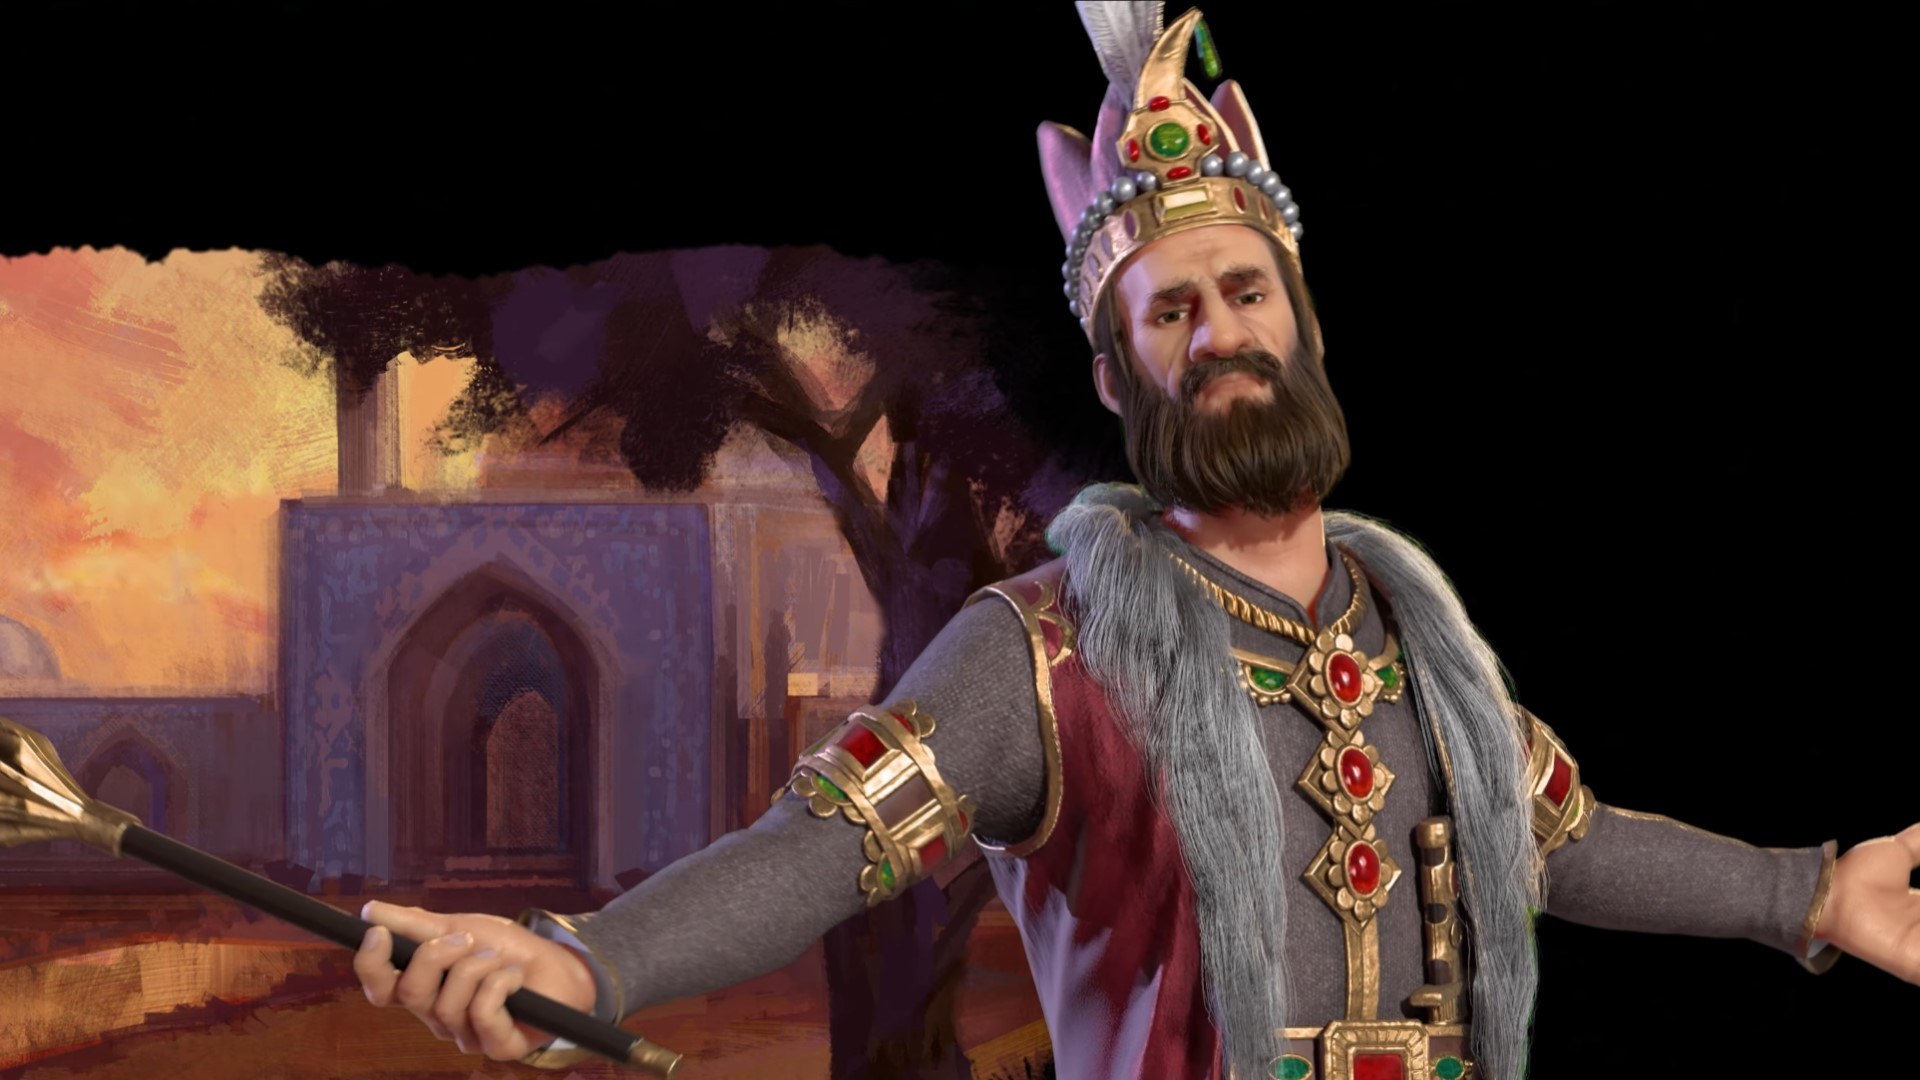 Civilization 6 Leader Pass DLC Great Commanders pack is out now